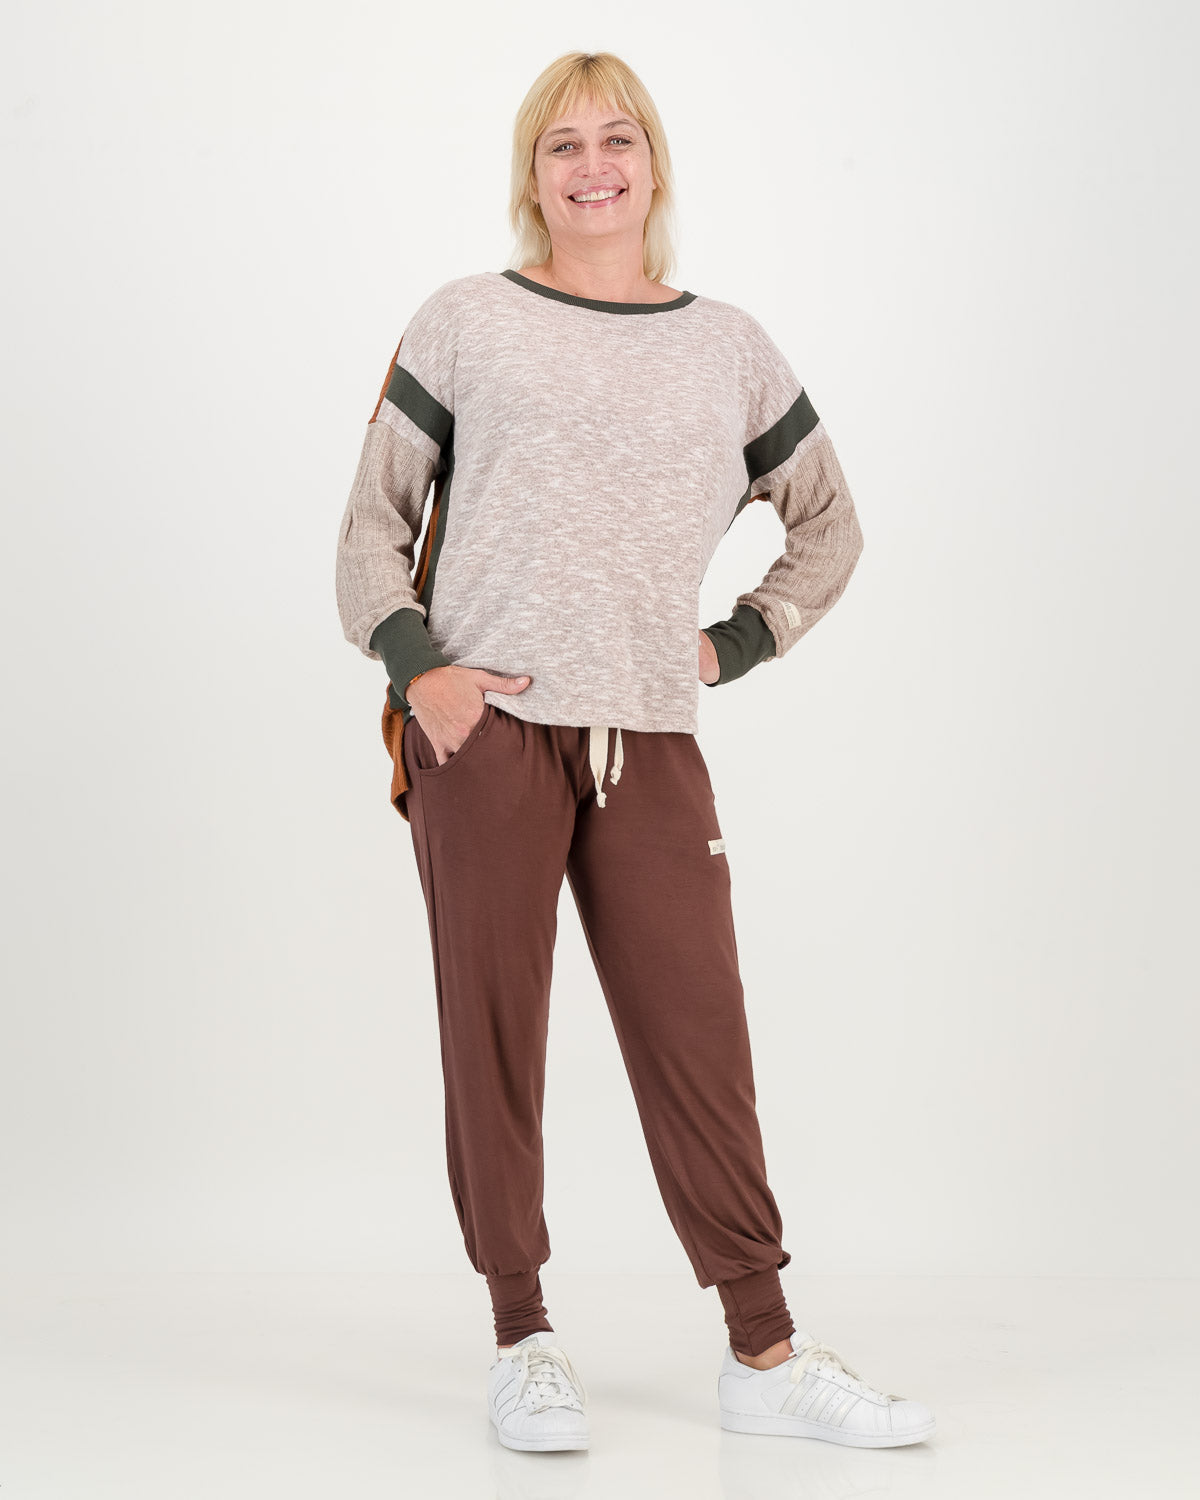 Care free jersey, stone color with olive inserts,model is wearing chocolate color comfy pants